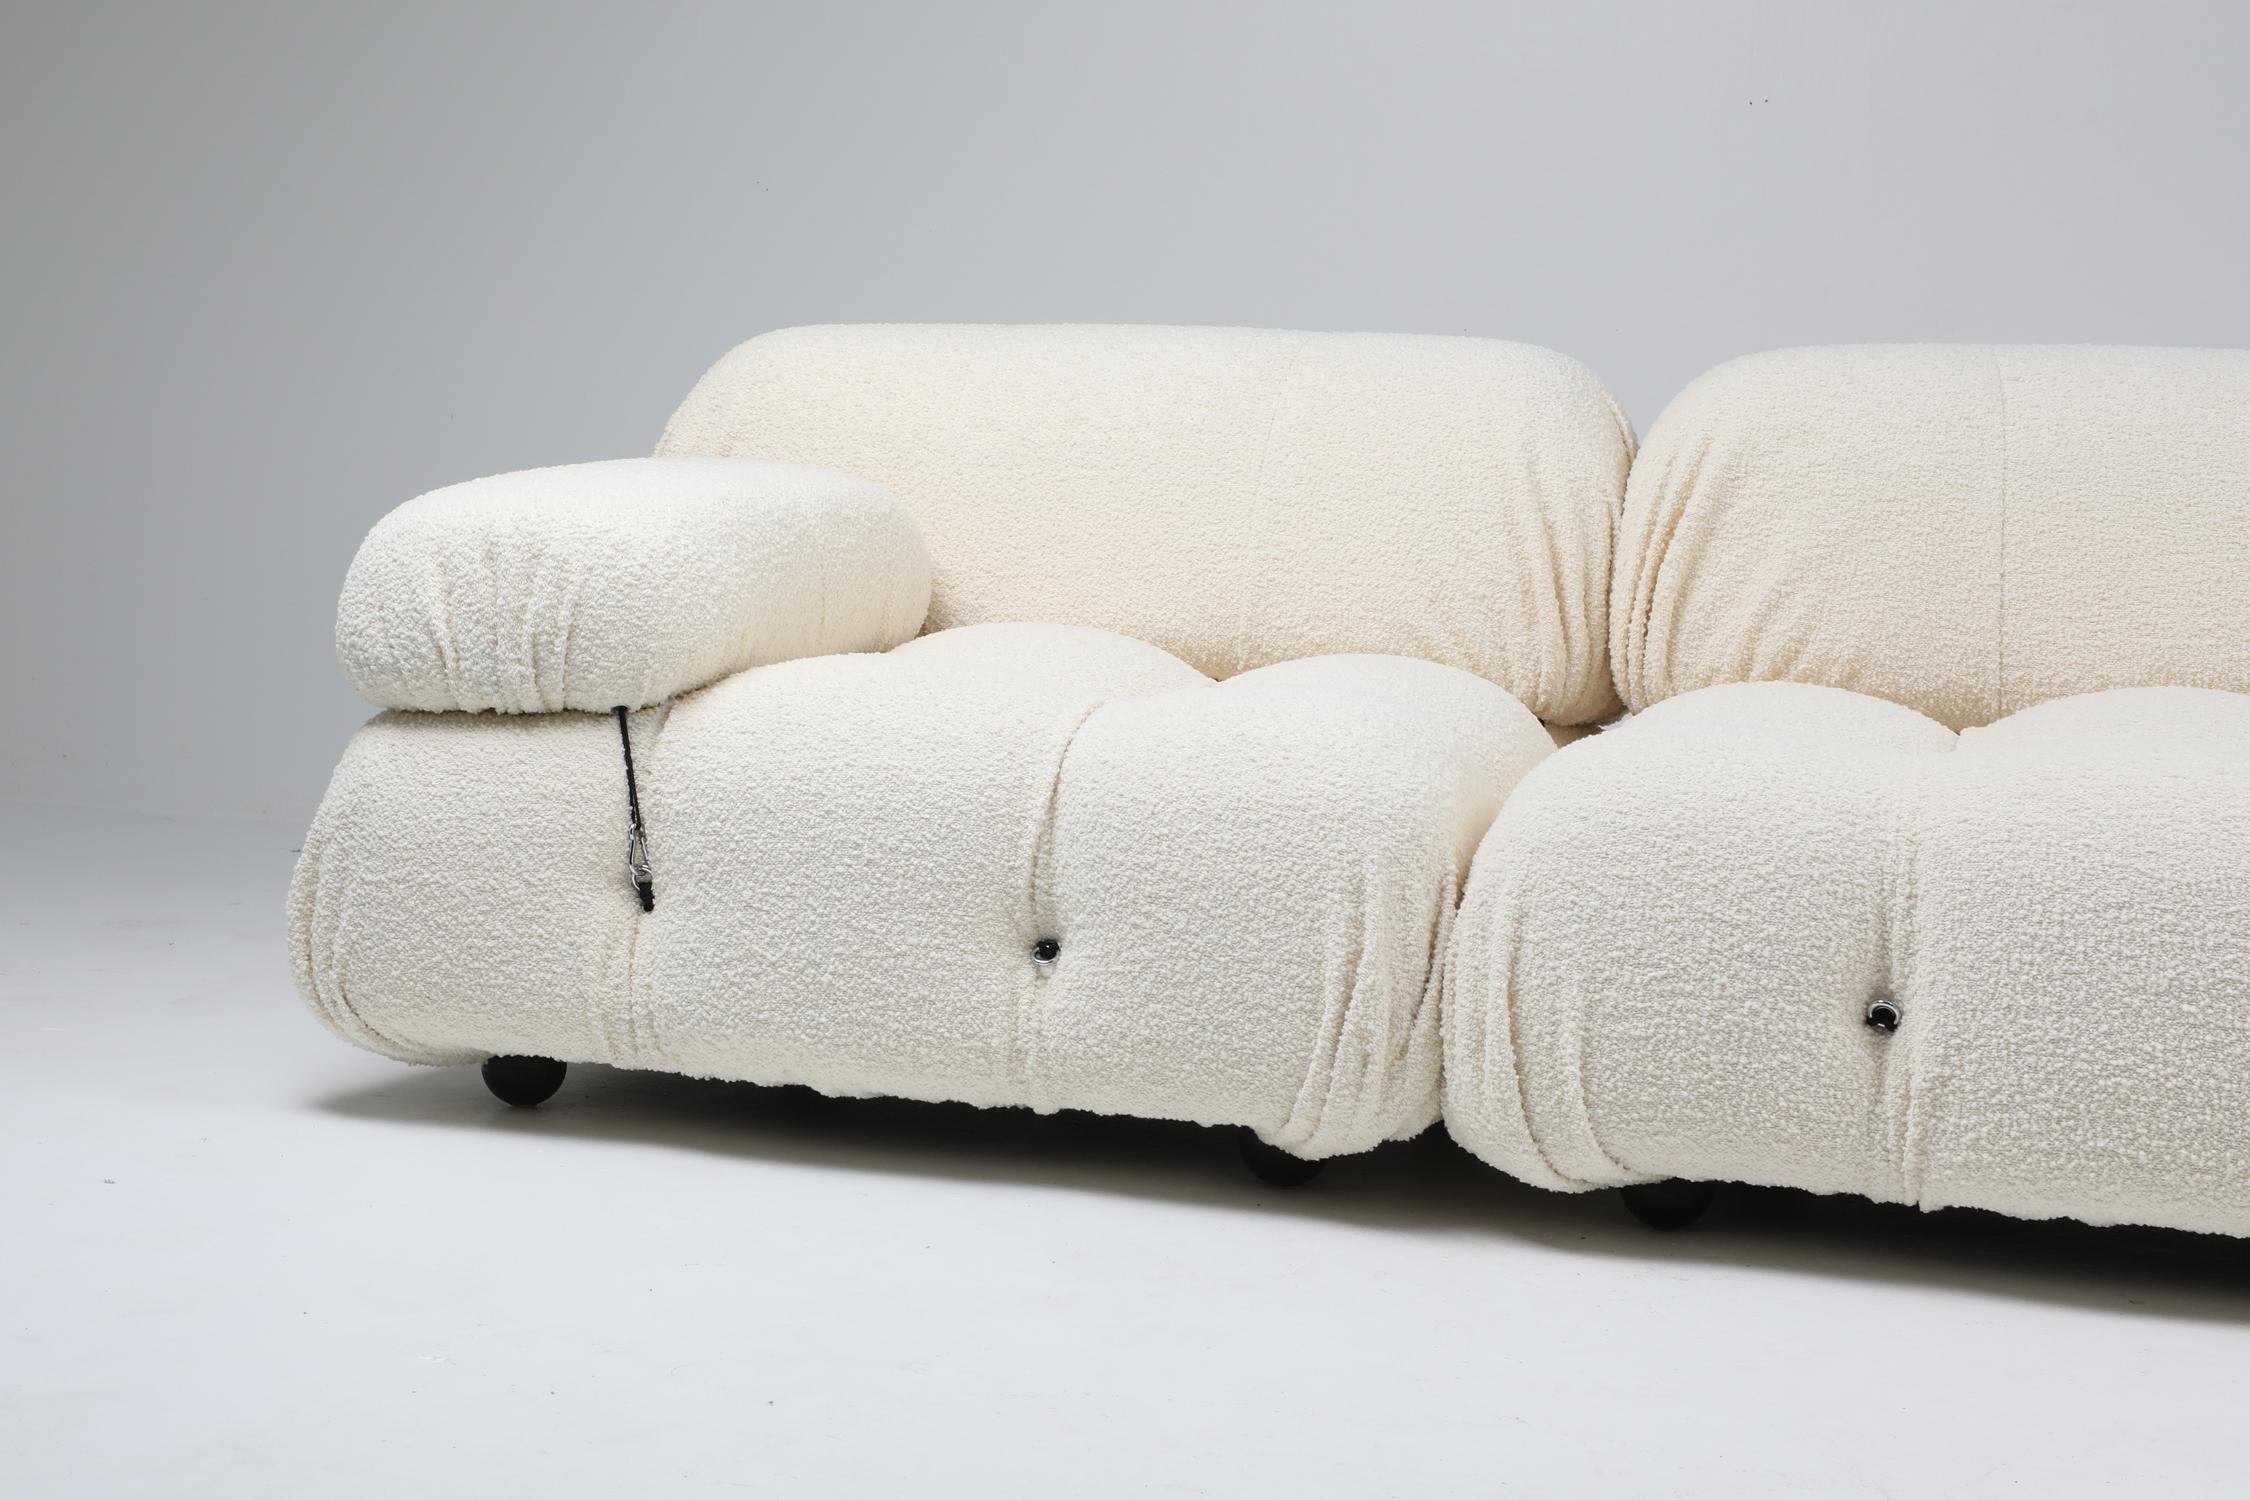 Mario Bellini, Italy 1970s, camaleonda sofa, reupholstered in bouclé wool

Postmodern sectional sofa by Mario Bellini for C&B Italia 
The entire sofa consists of 3 big seating elements and two armrests. The couch has been reupholstered in an